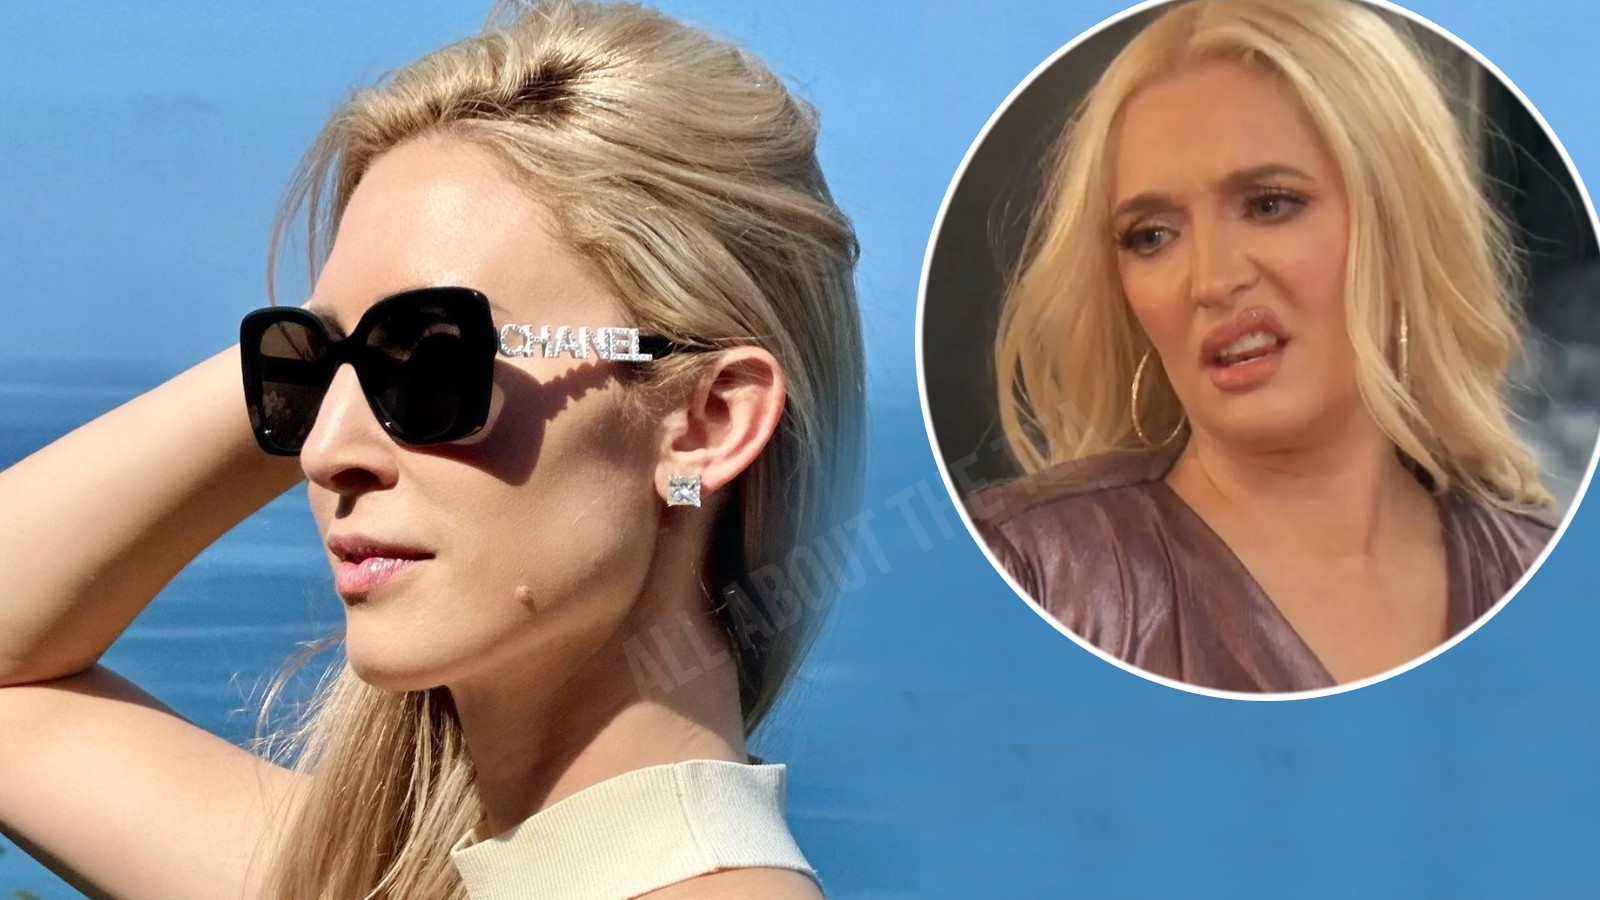 Attorney Ronald Richards’ Wife Buys Erika Jayne’s Auctioned Diamond Earrings … This Is MESSY!